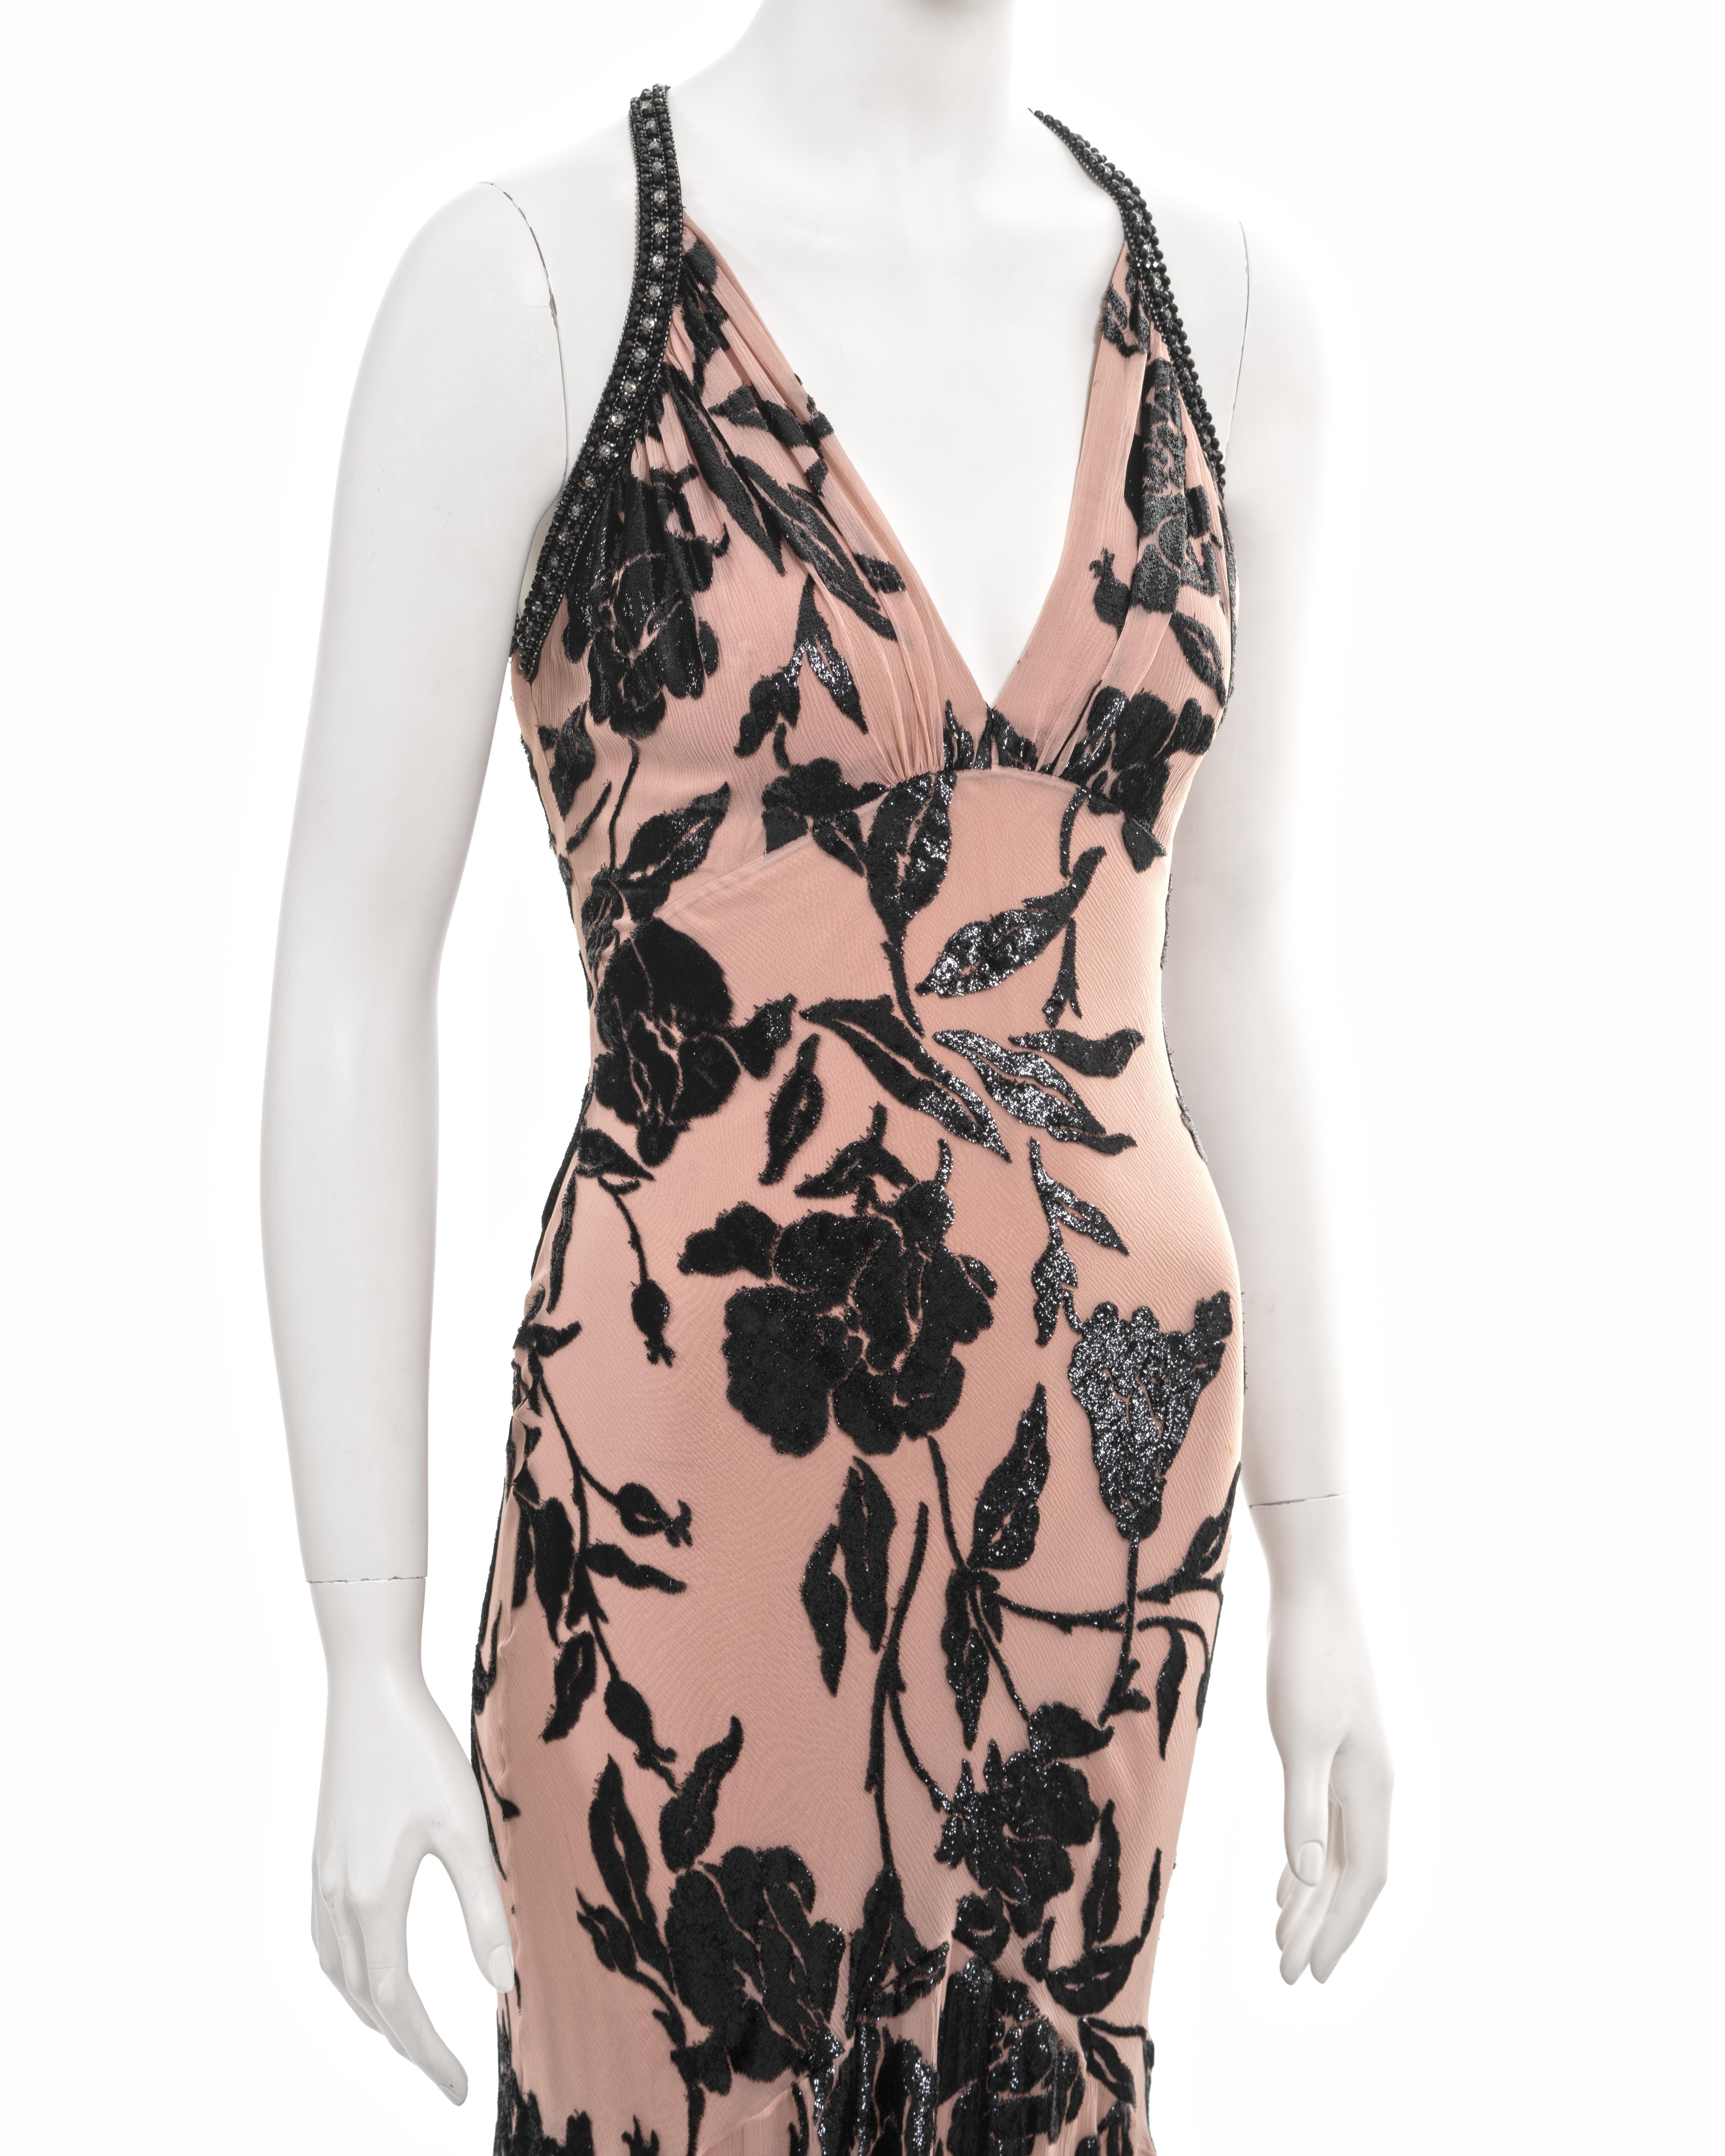 Christian Dior by John Galliano dusty pink floral silk evening dress fw 2010 For Sale 2